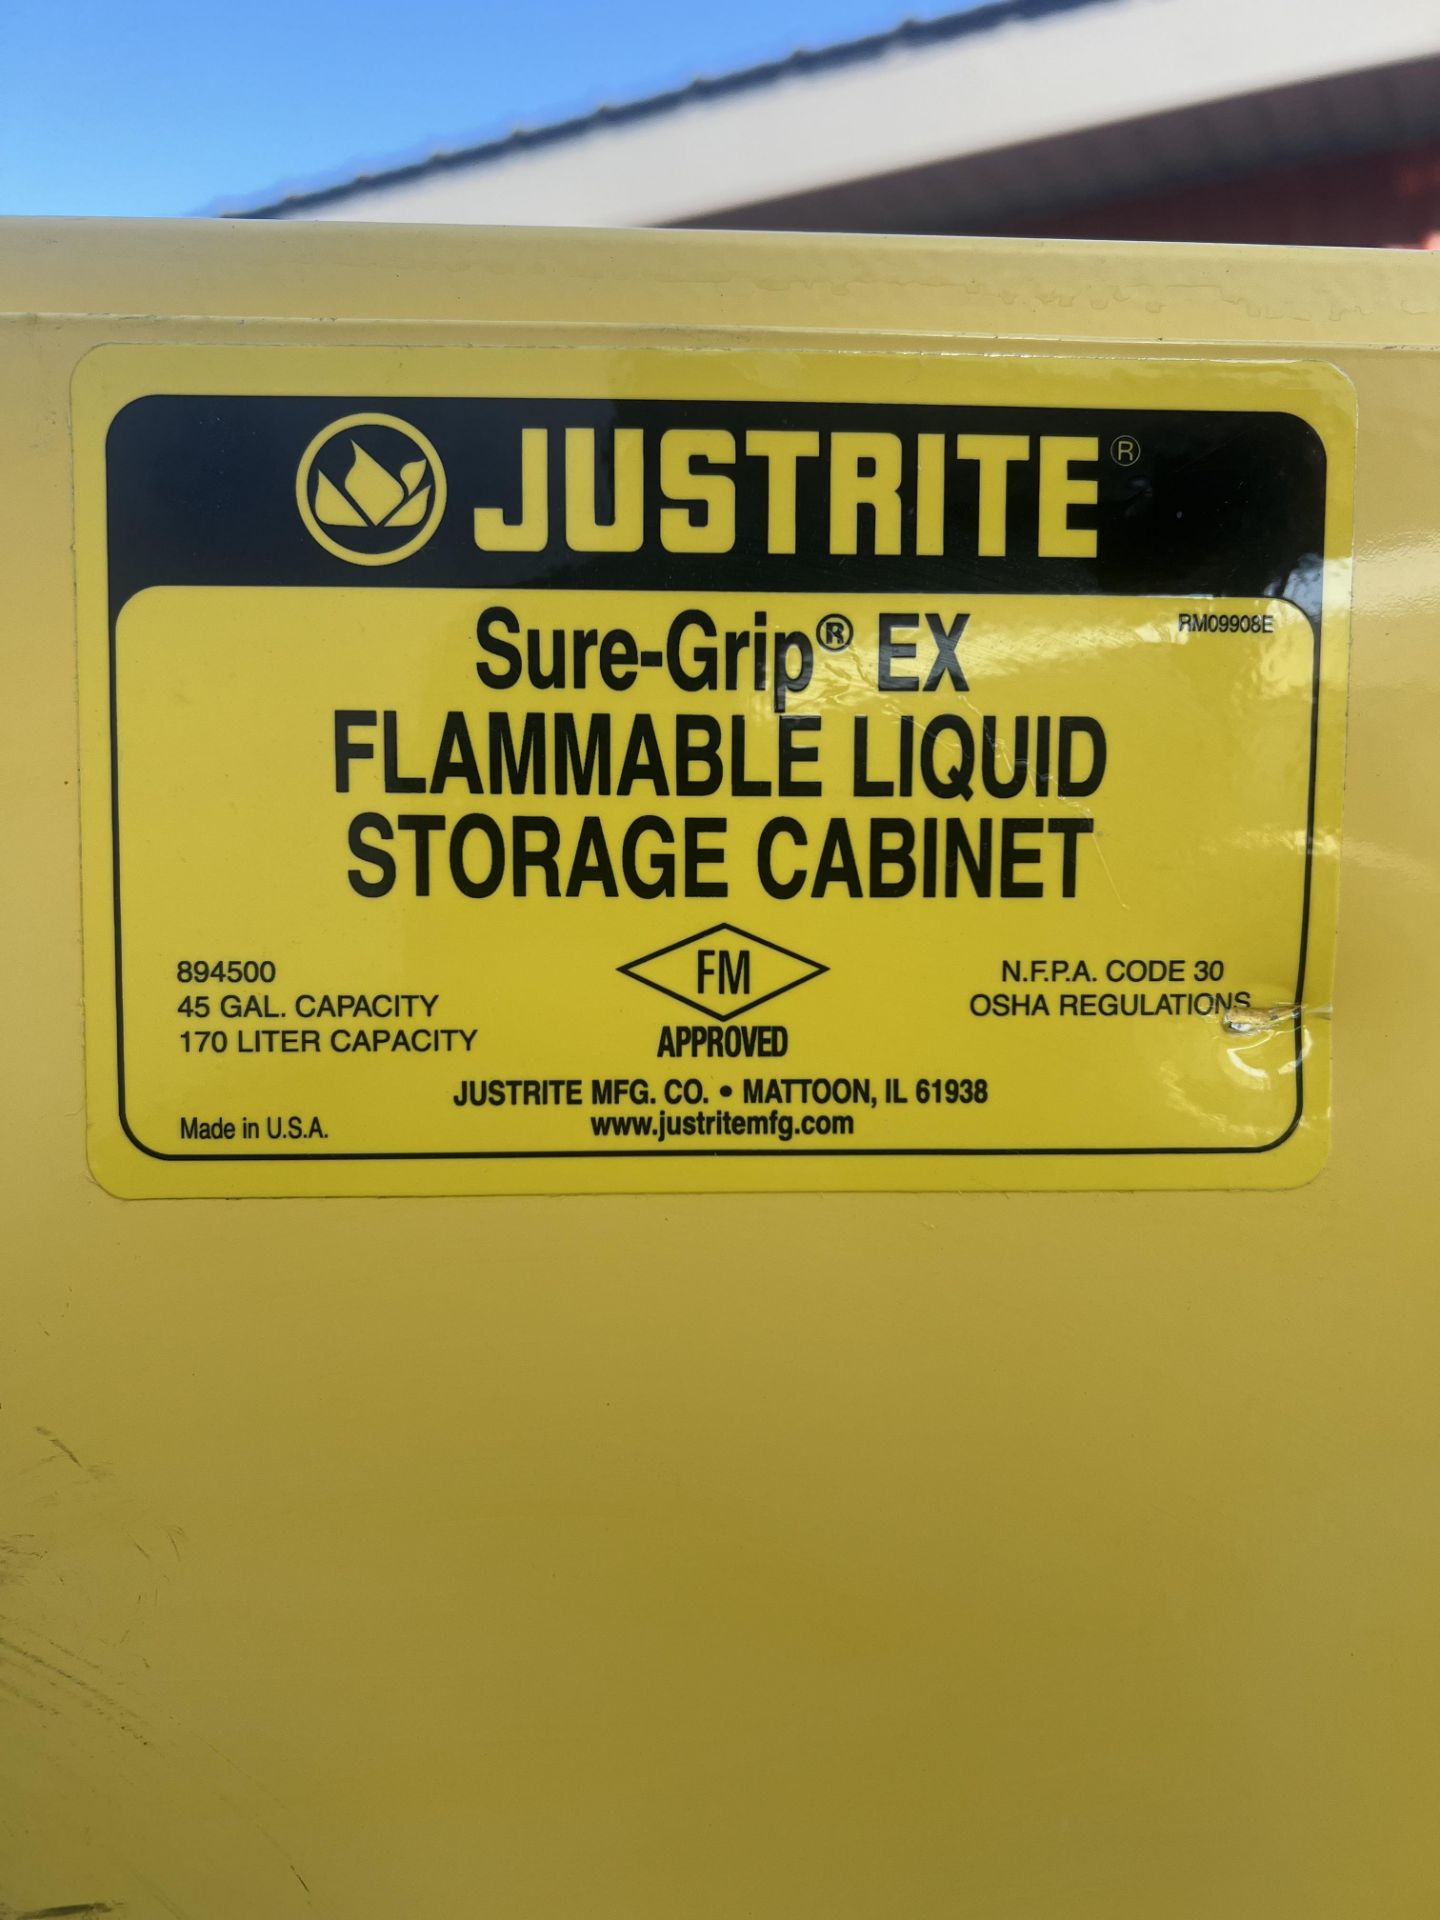 Flammable Safety Storage Cabinet - Image 3 of 3